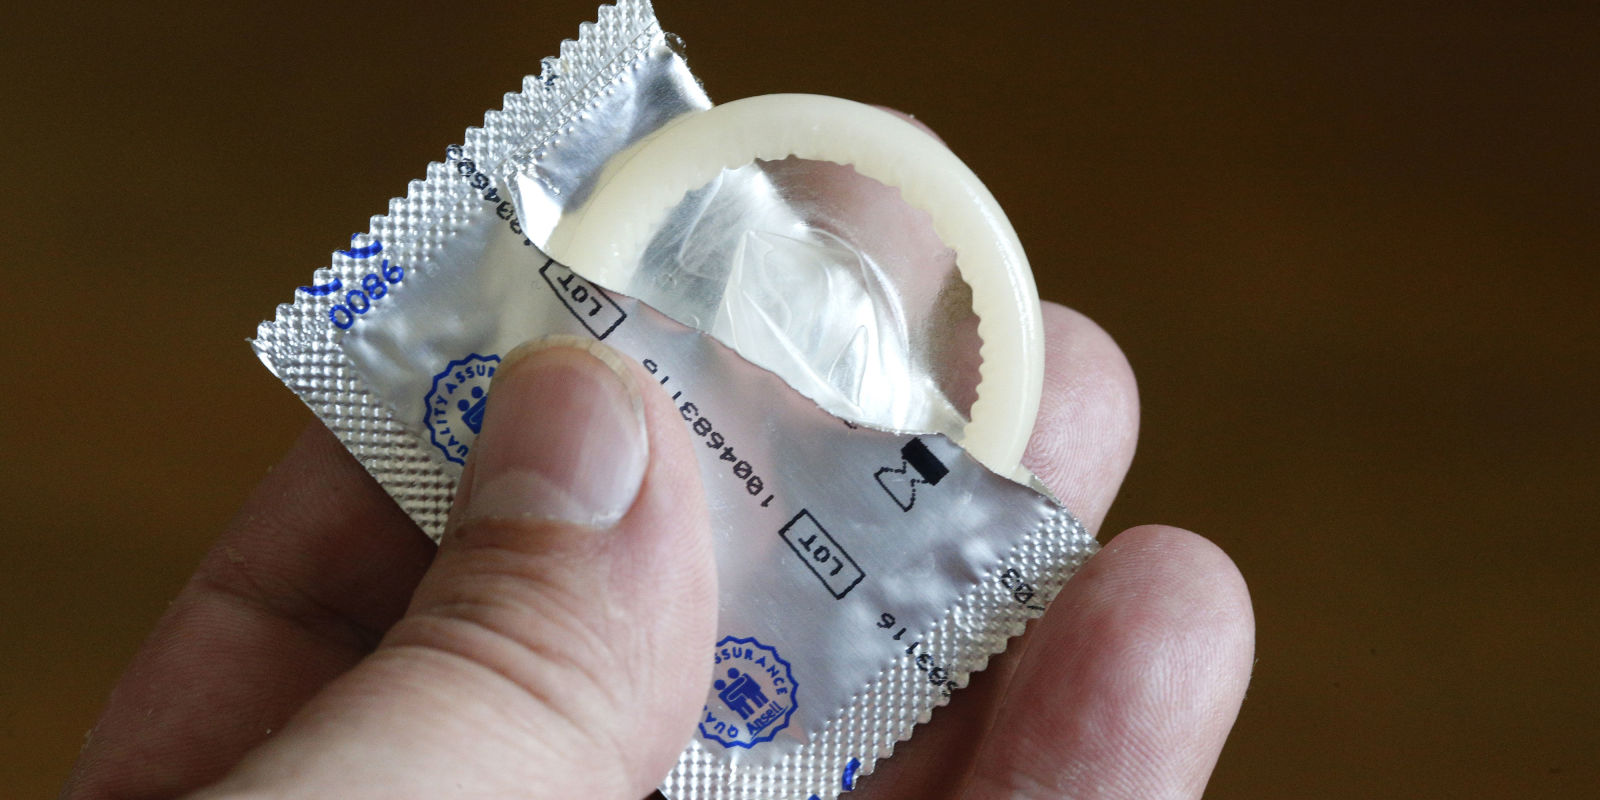 Sexuality : Stealthing, Why is it Dangerous?